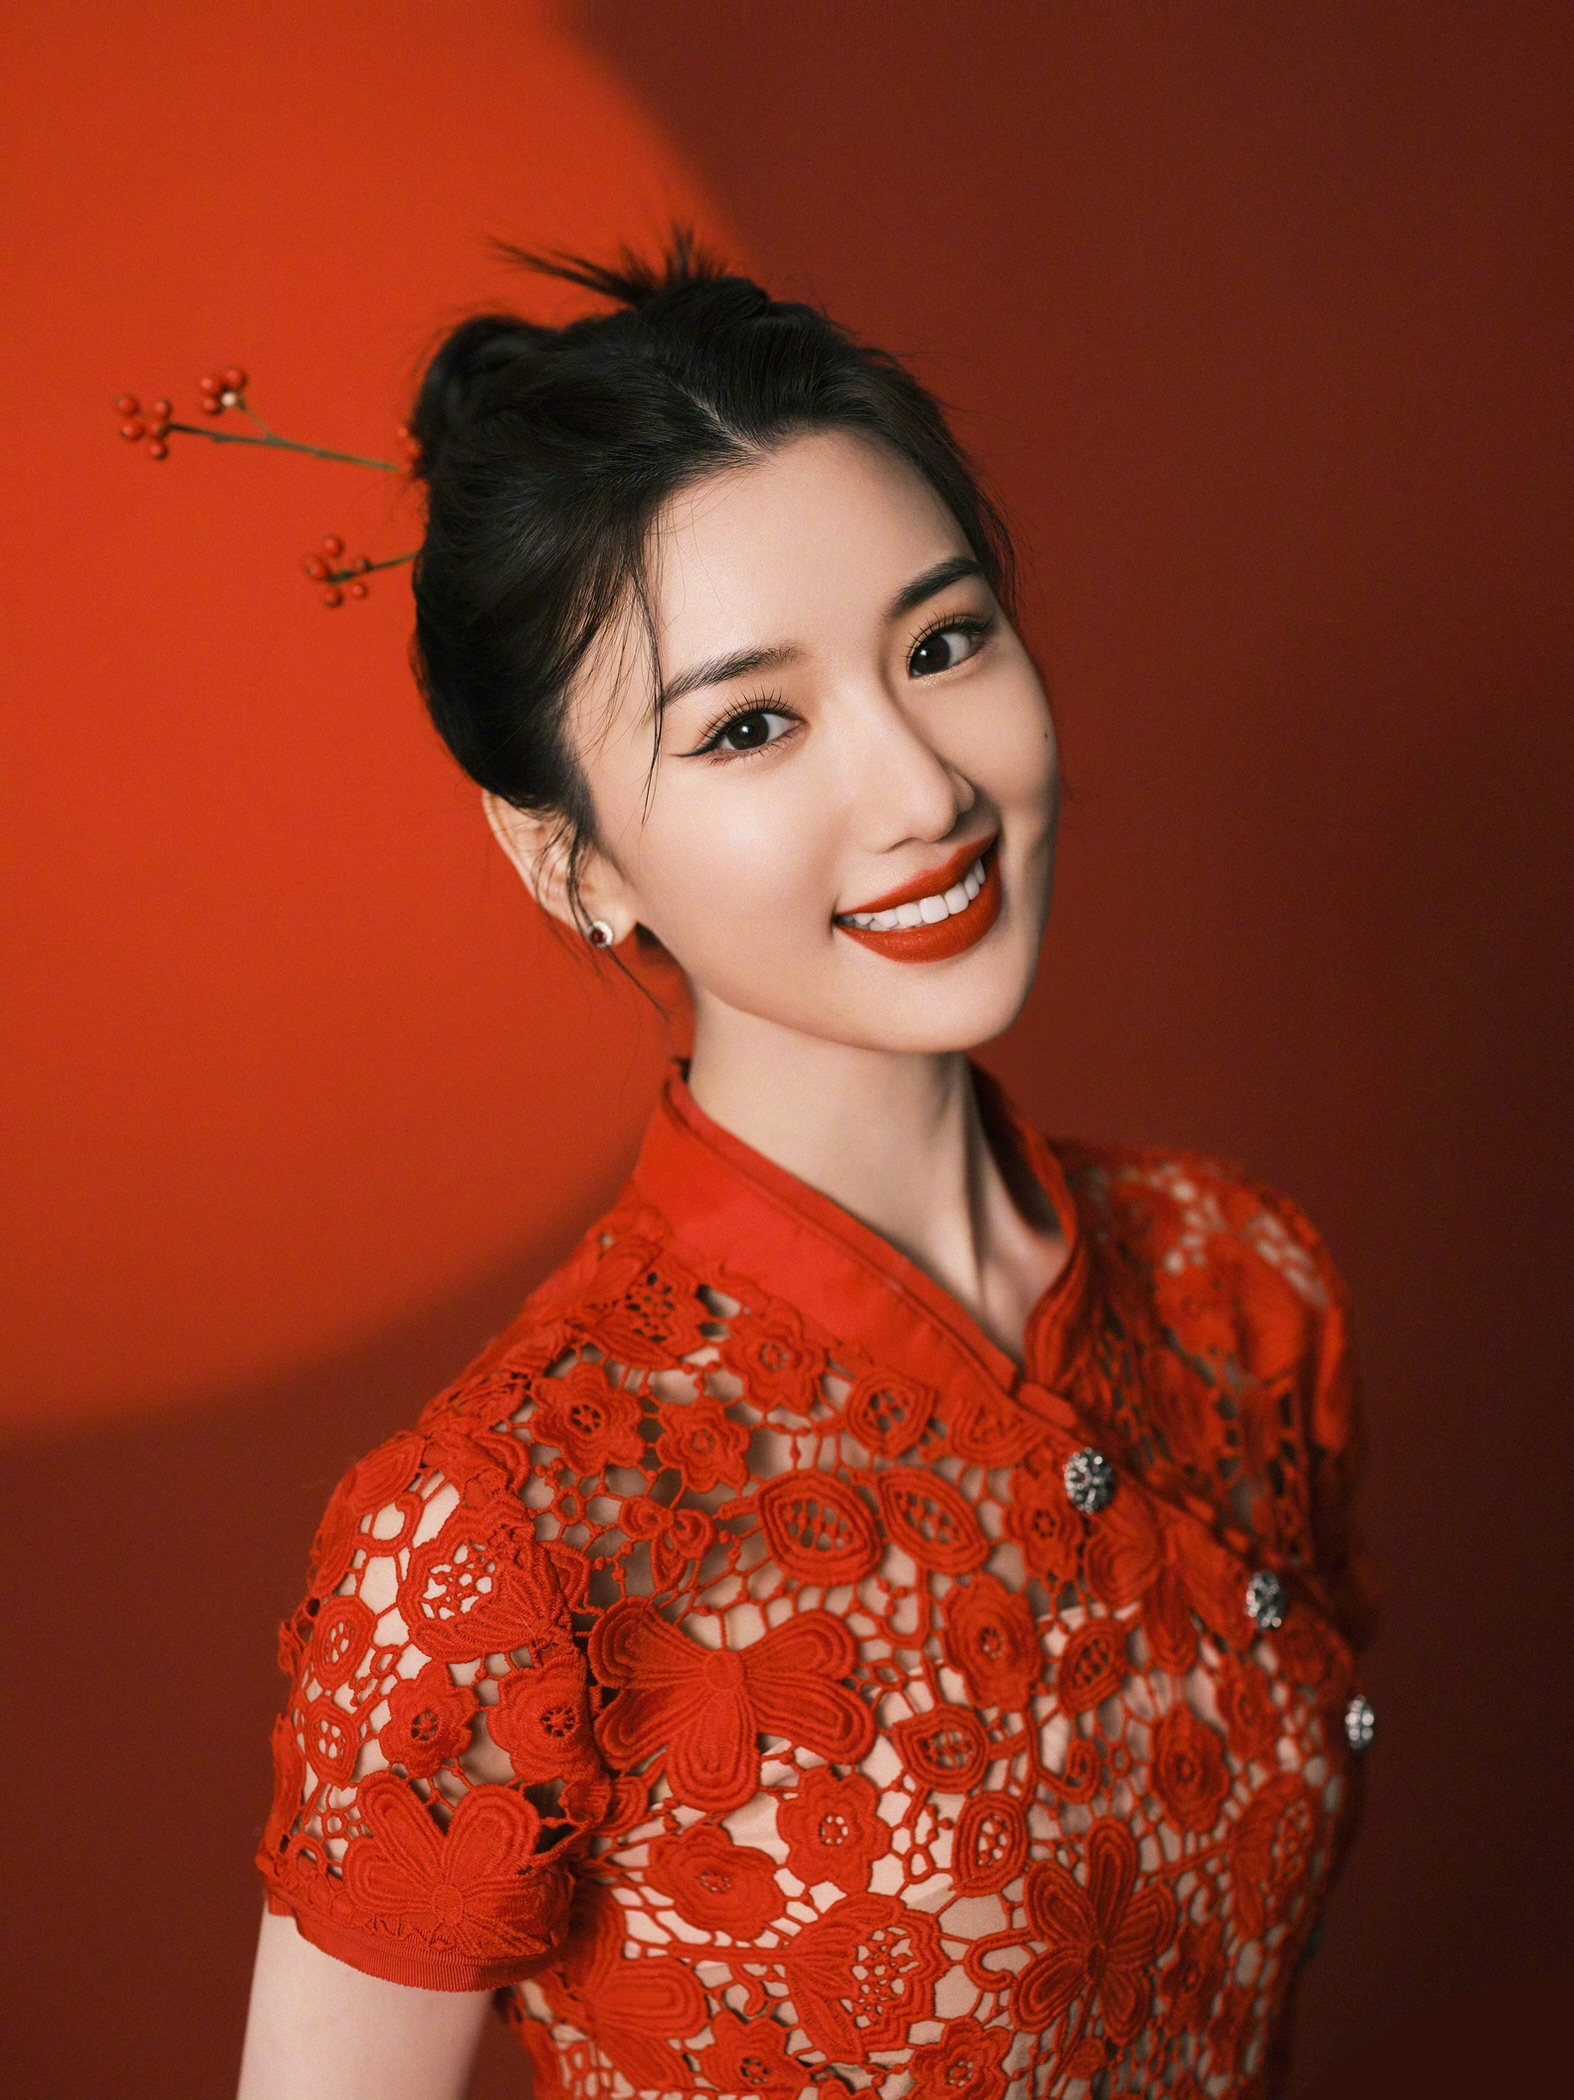 Asia Chinese Dress Women Star Academy Nature Simple Background Celebrity Mao Xiaotong Asian 1574x2100